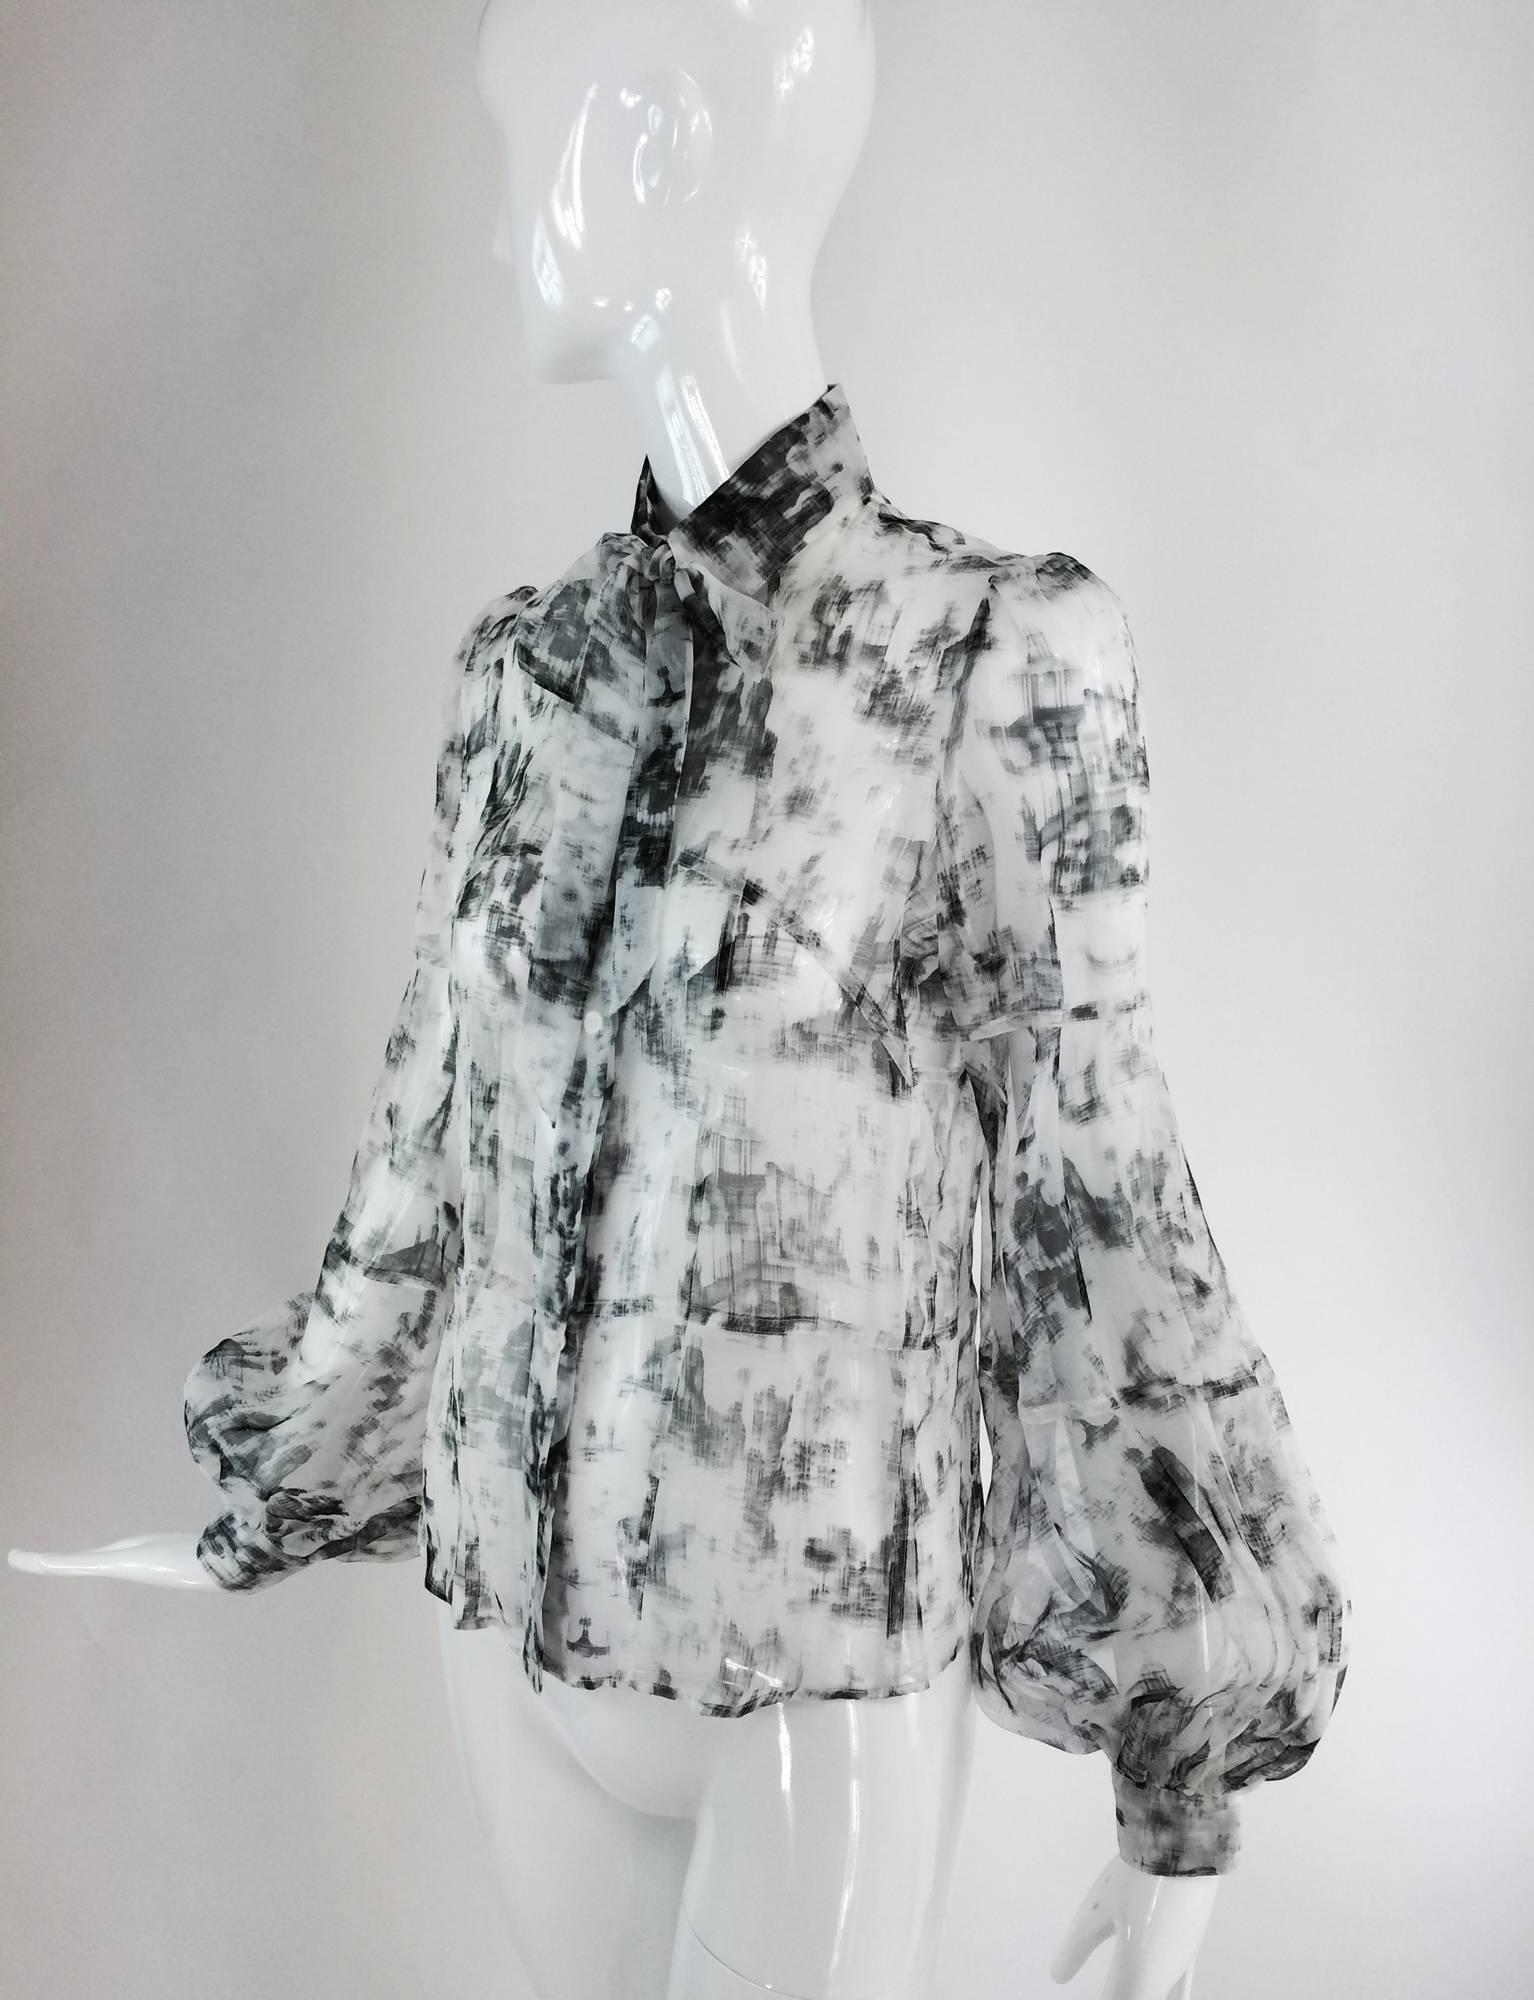 Valentino Hiver 2008 black & white organza blouse...Modern print in shades of gray to black...Fitted blouse with self bow at the collar, placket front with logo buttons, horizontal seaming in the torso...Long sleeves with fullness at the wrist,